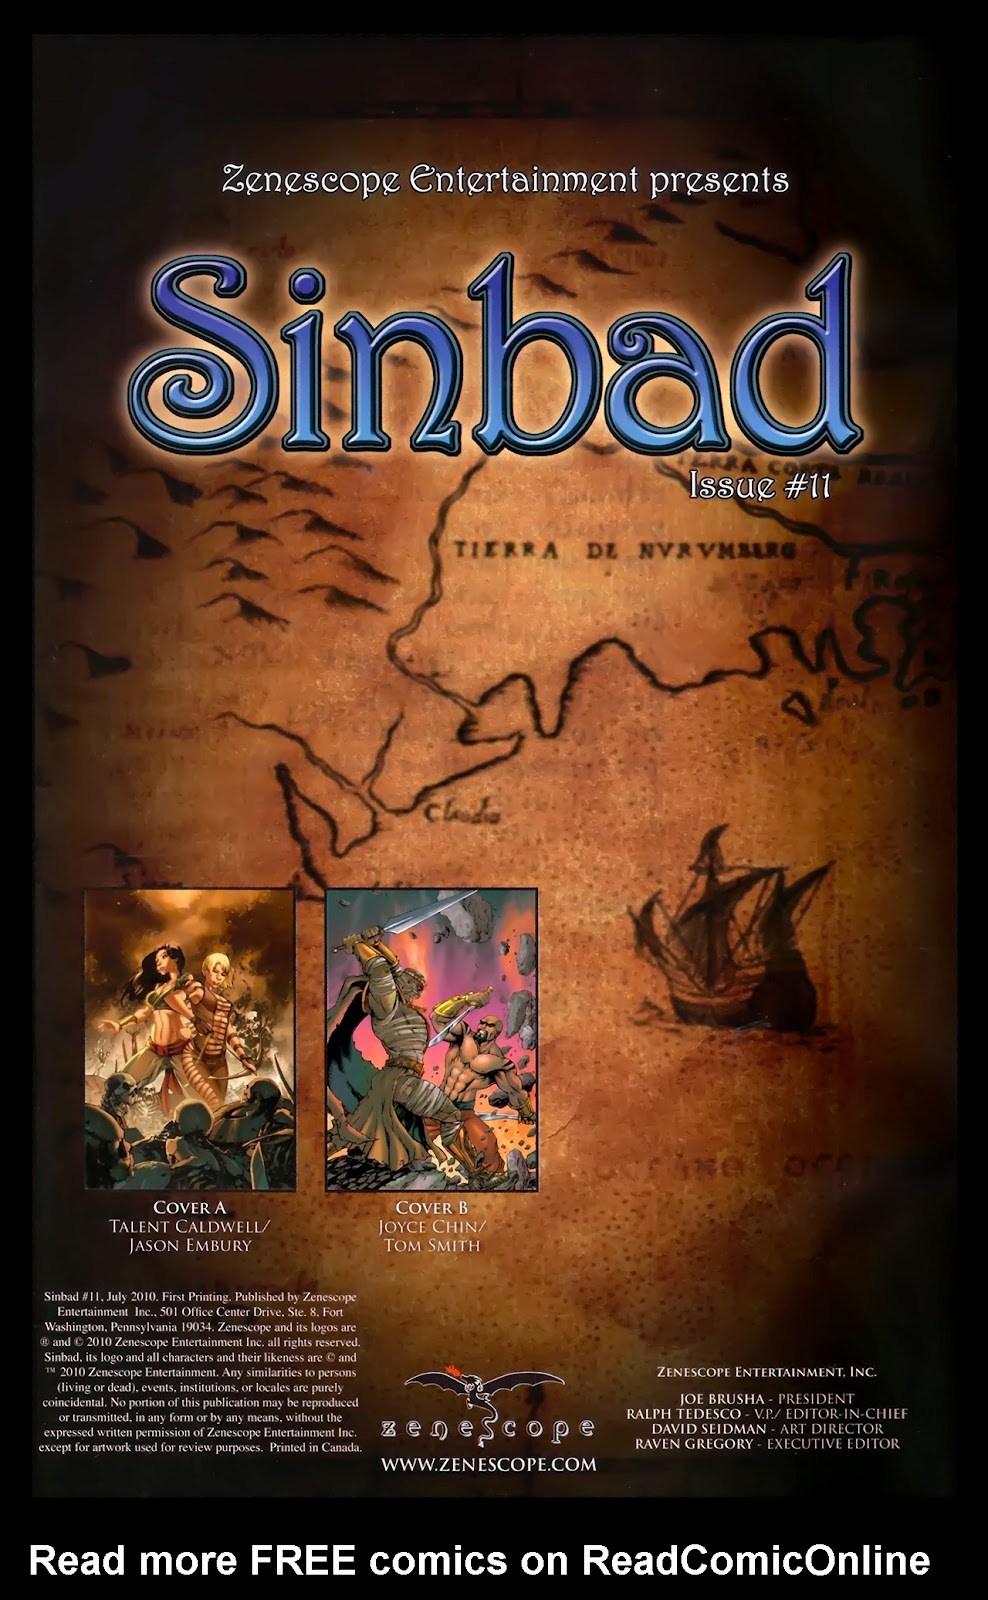 1001 Arabian Nights: The Adventures of Sinbad issue 11 - Page 2